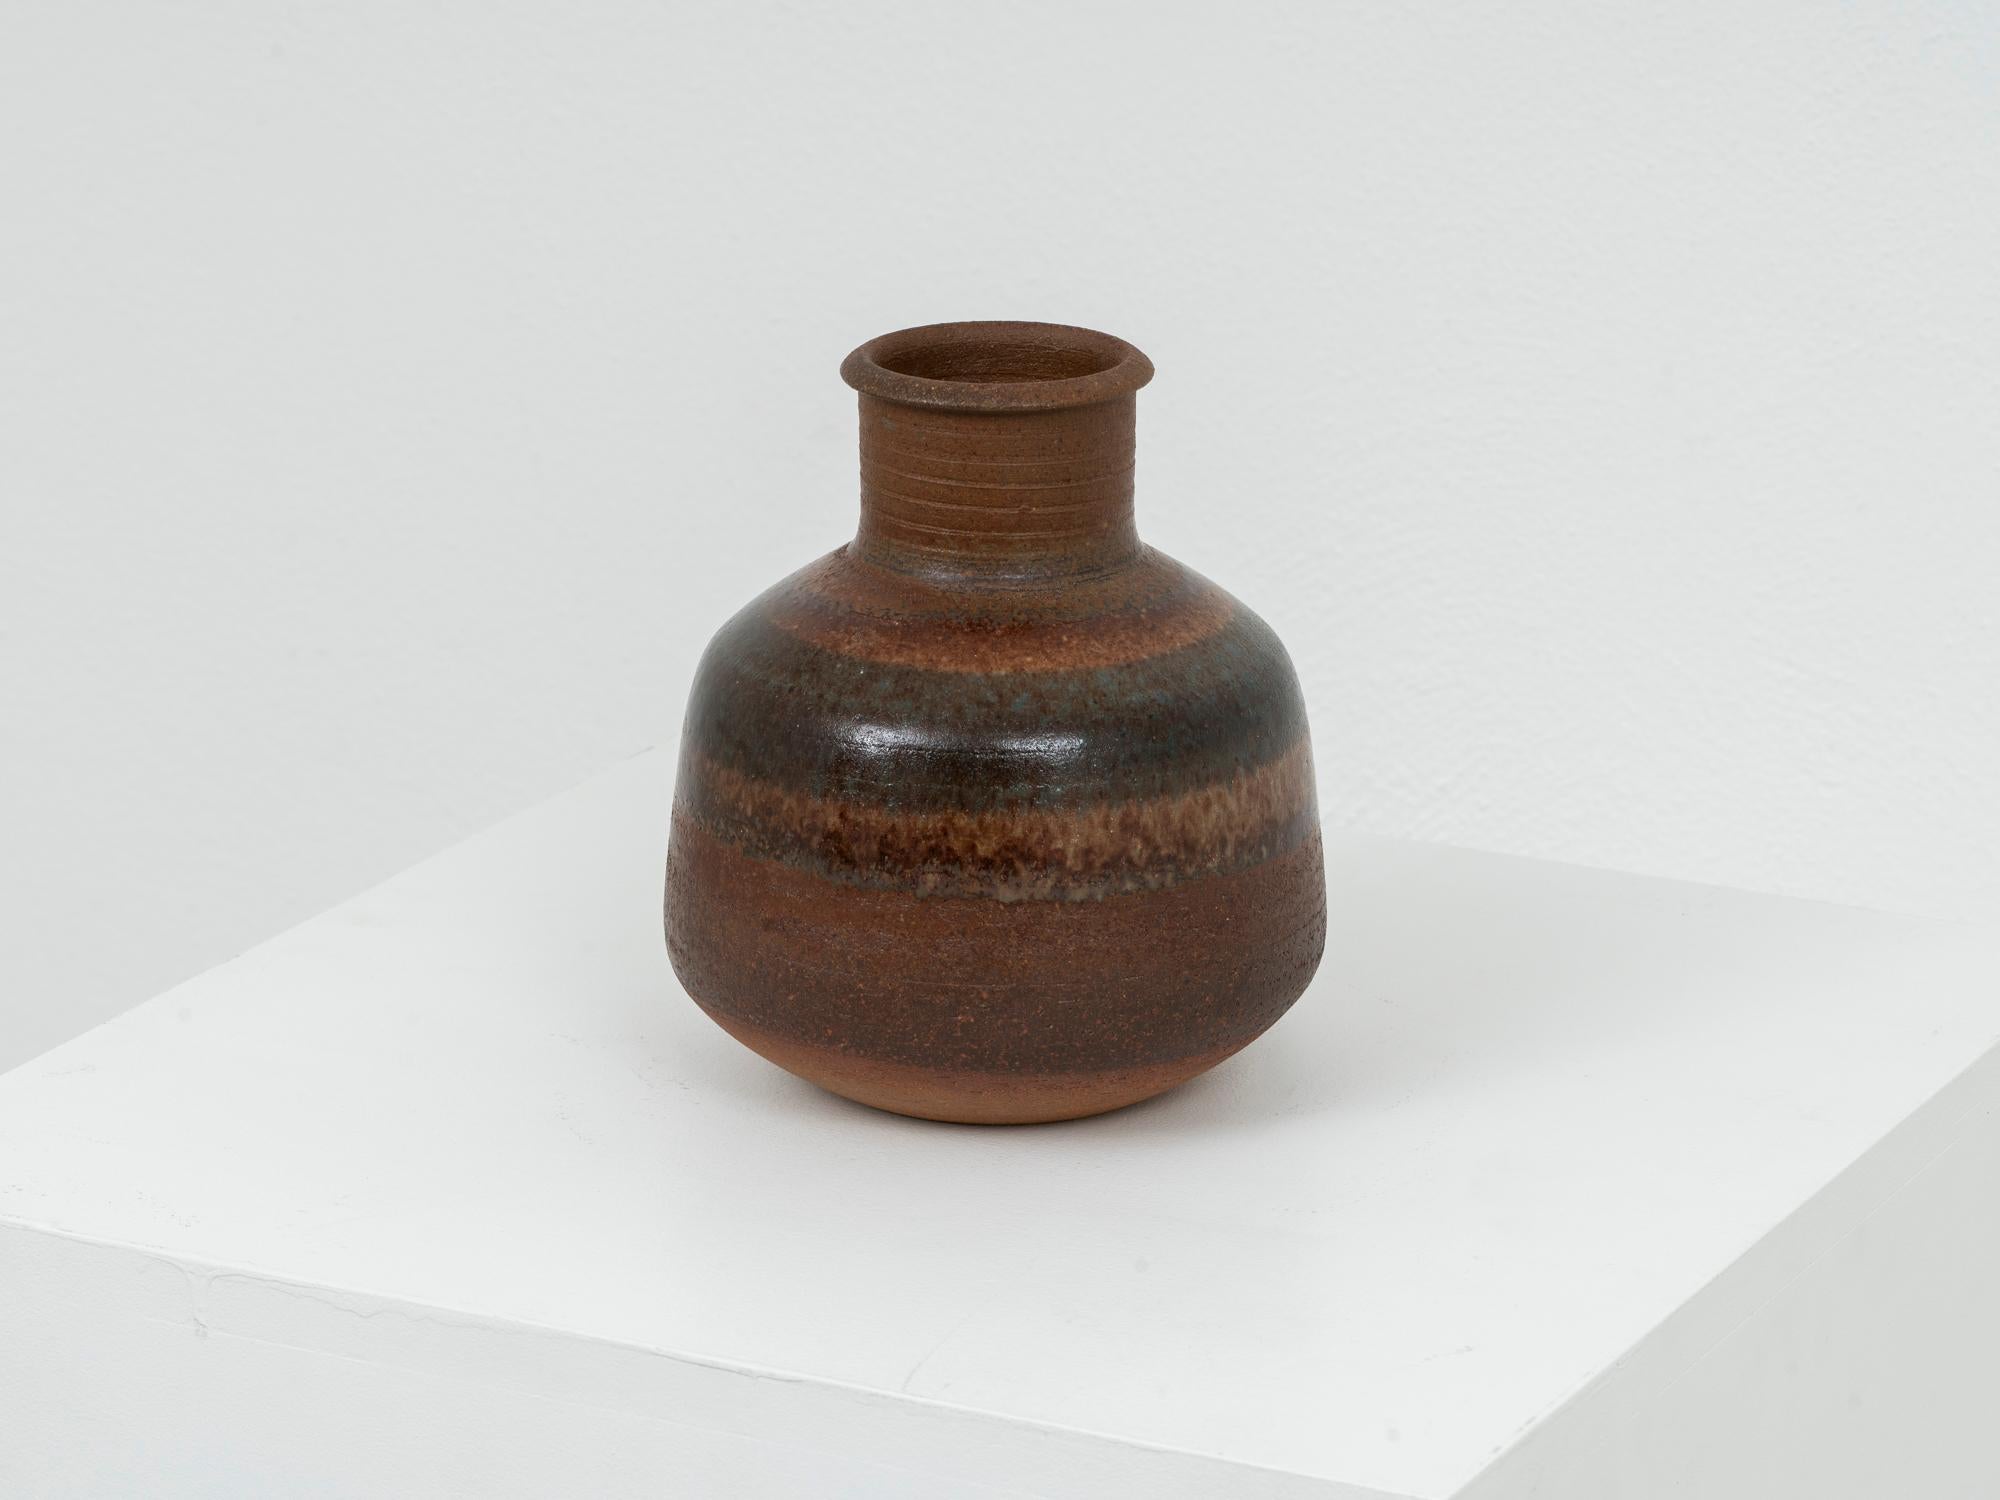 Ceramic vase produced in the 1970s a small series by Ceramica Arcore, crafted by Marco Terenzi and finished by Nanni Valentini, in warm brown earthly tones. Remains in very good vintage conditions with no significant wear. Signed under the